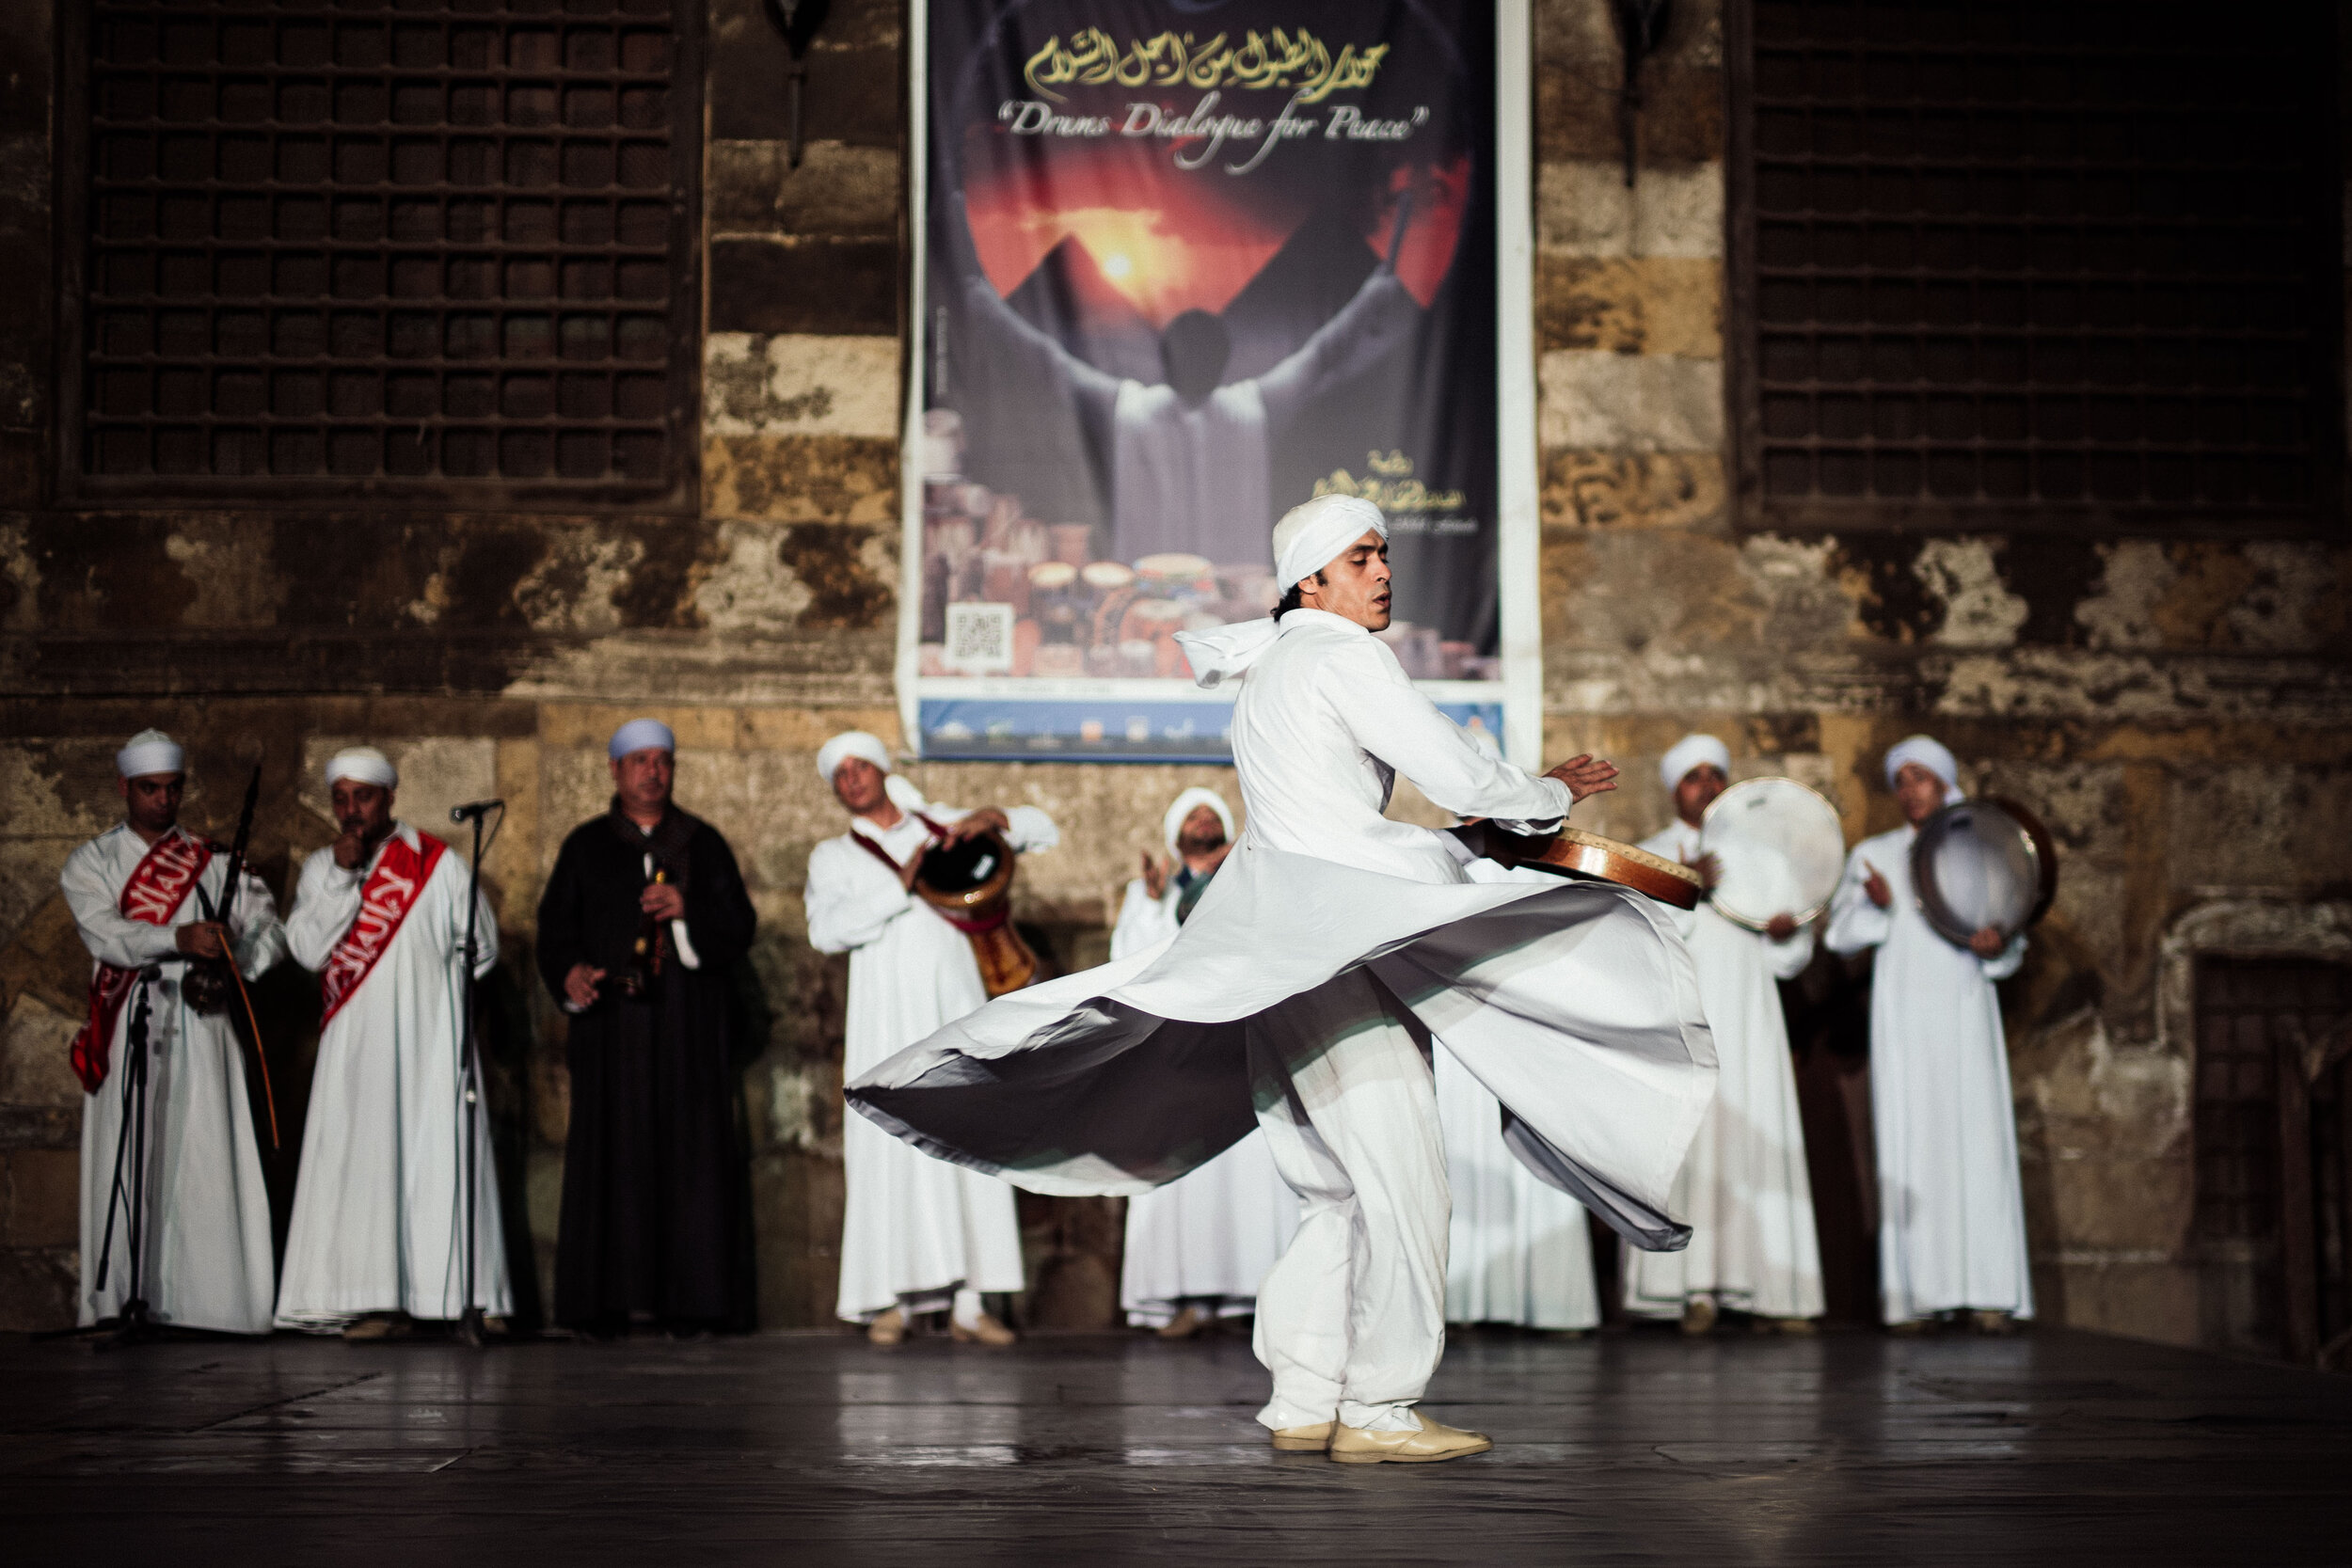 These Whirling Dervishes believe in performing their dhikr (an Islamic devotional act in which prayers are repeatedly recited within the mind or aloud) in the form of a dance which involves whirling.

This dance represents a mystical journey of man's spiritual ascent through mind and love to the "Perfect". Turning, the follower grows through love, deserts his ego, and finds truth. He then returns from this spiritual journey as a man who has reached maturity and a greater perfection, able to love and to be of service to the whole of creation.